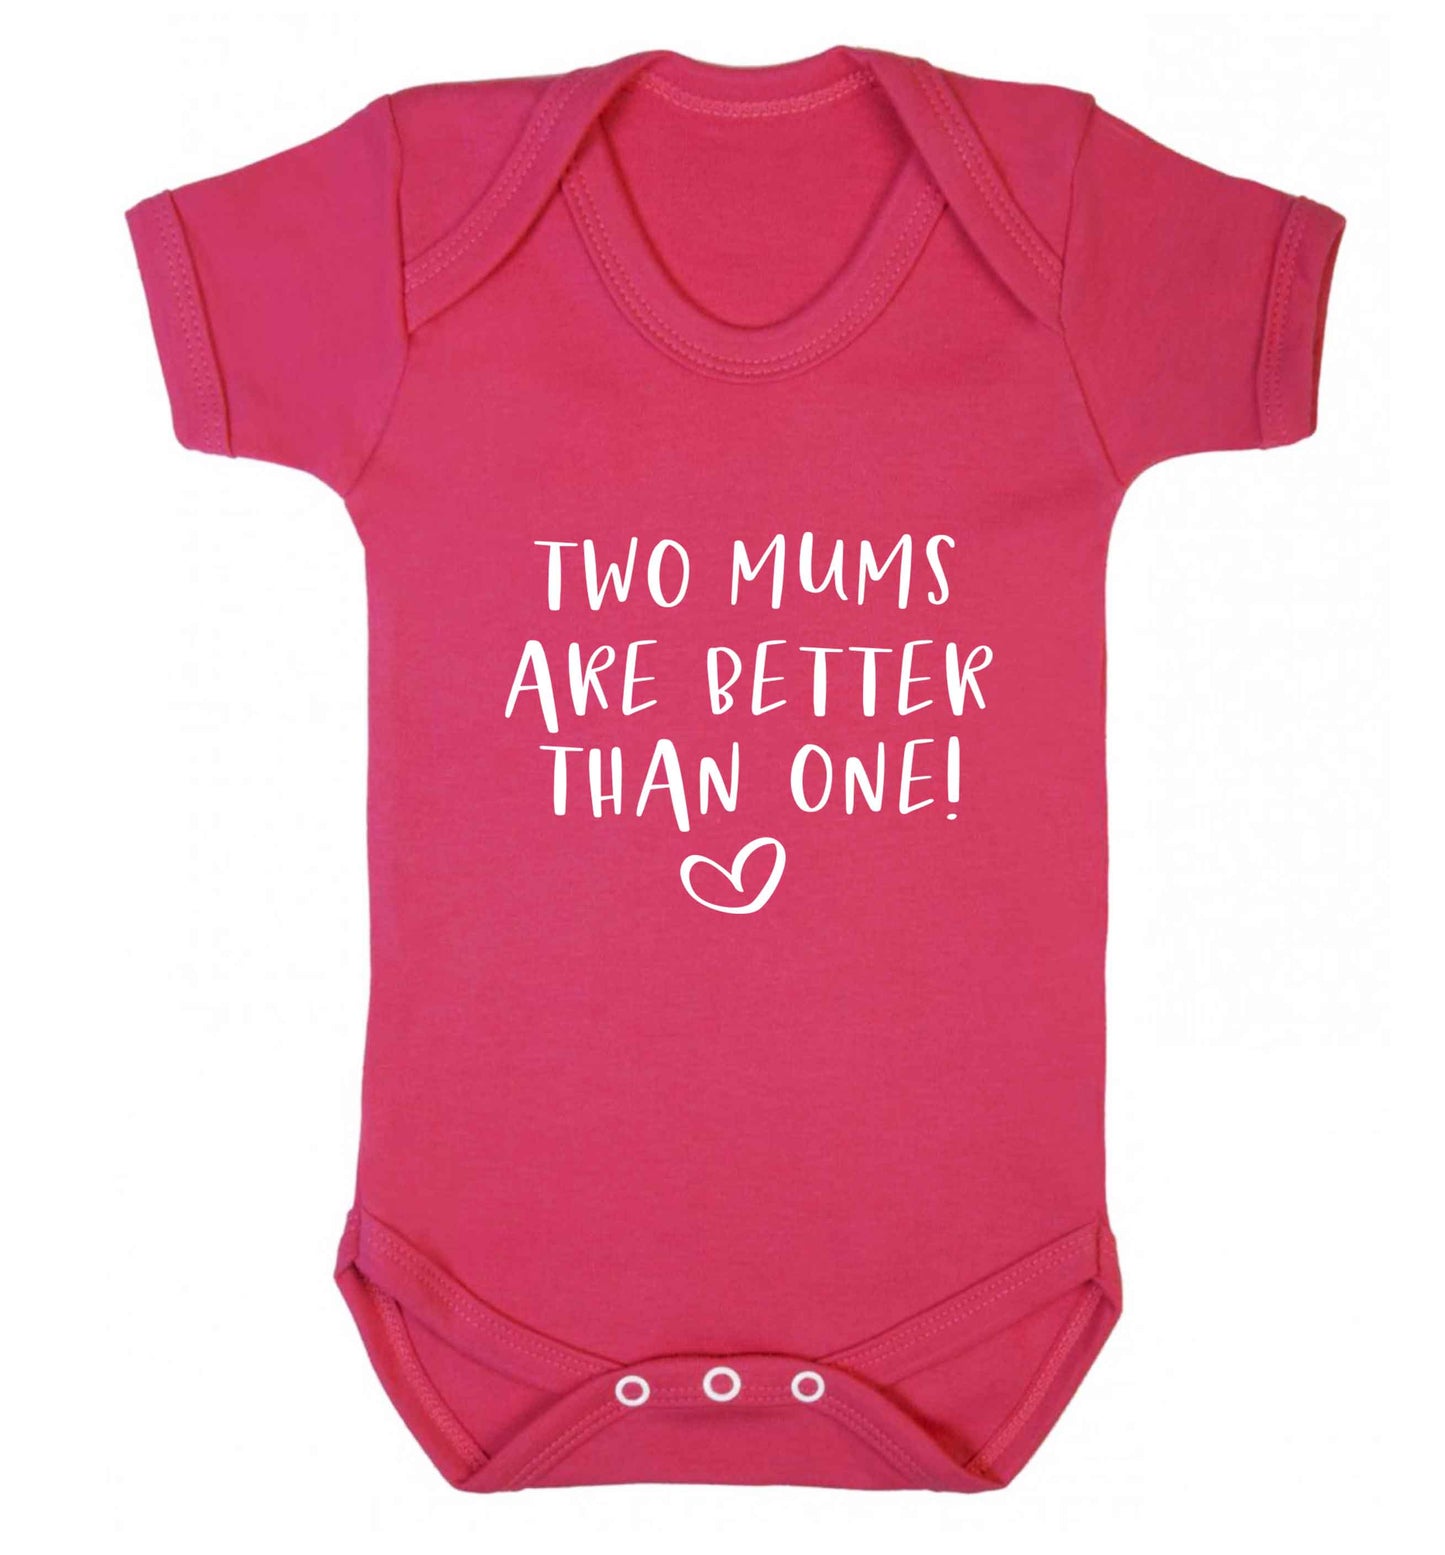 Two mums are better than one baby vest dark pink 18-24 months